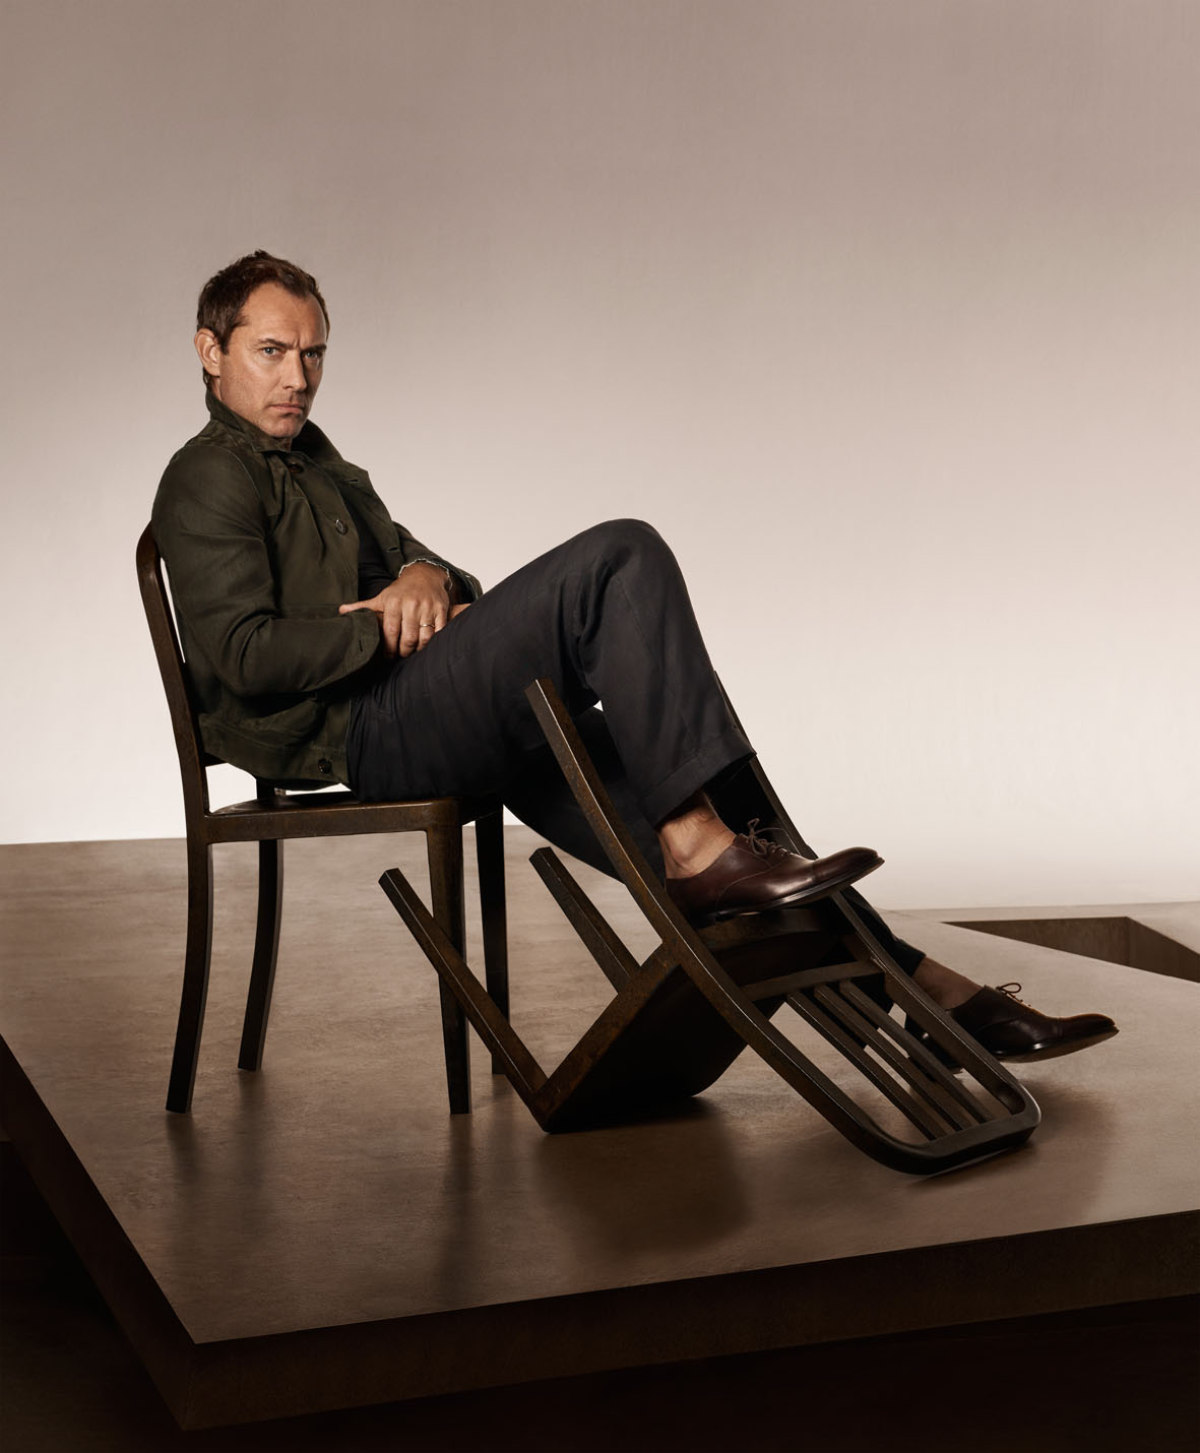 Brioni Introduces New Spring/Summer 2022 Campaign Featuring Jude Law And Raff Law